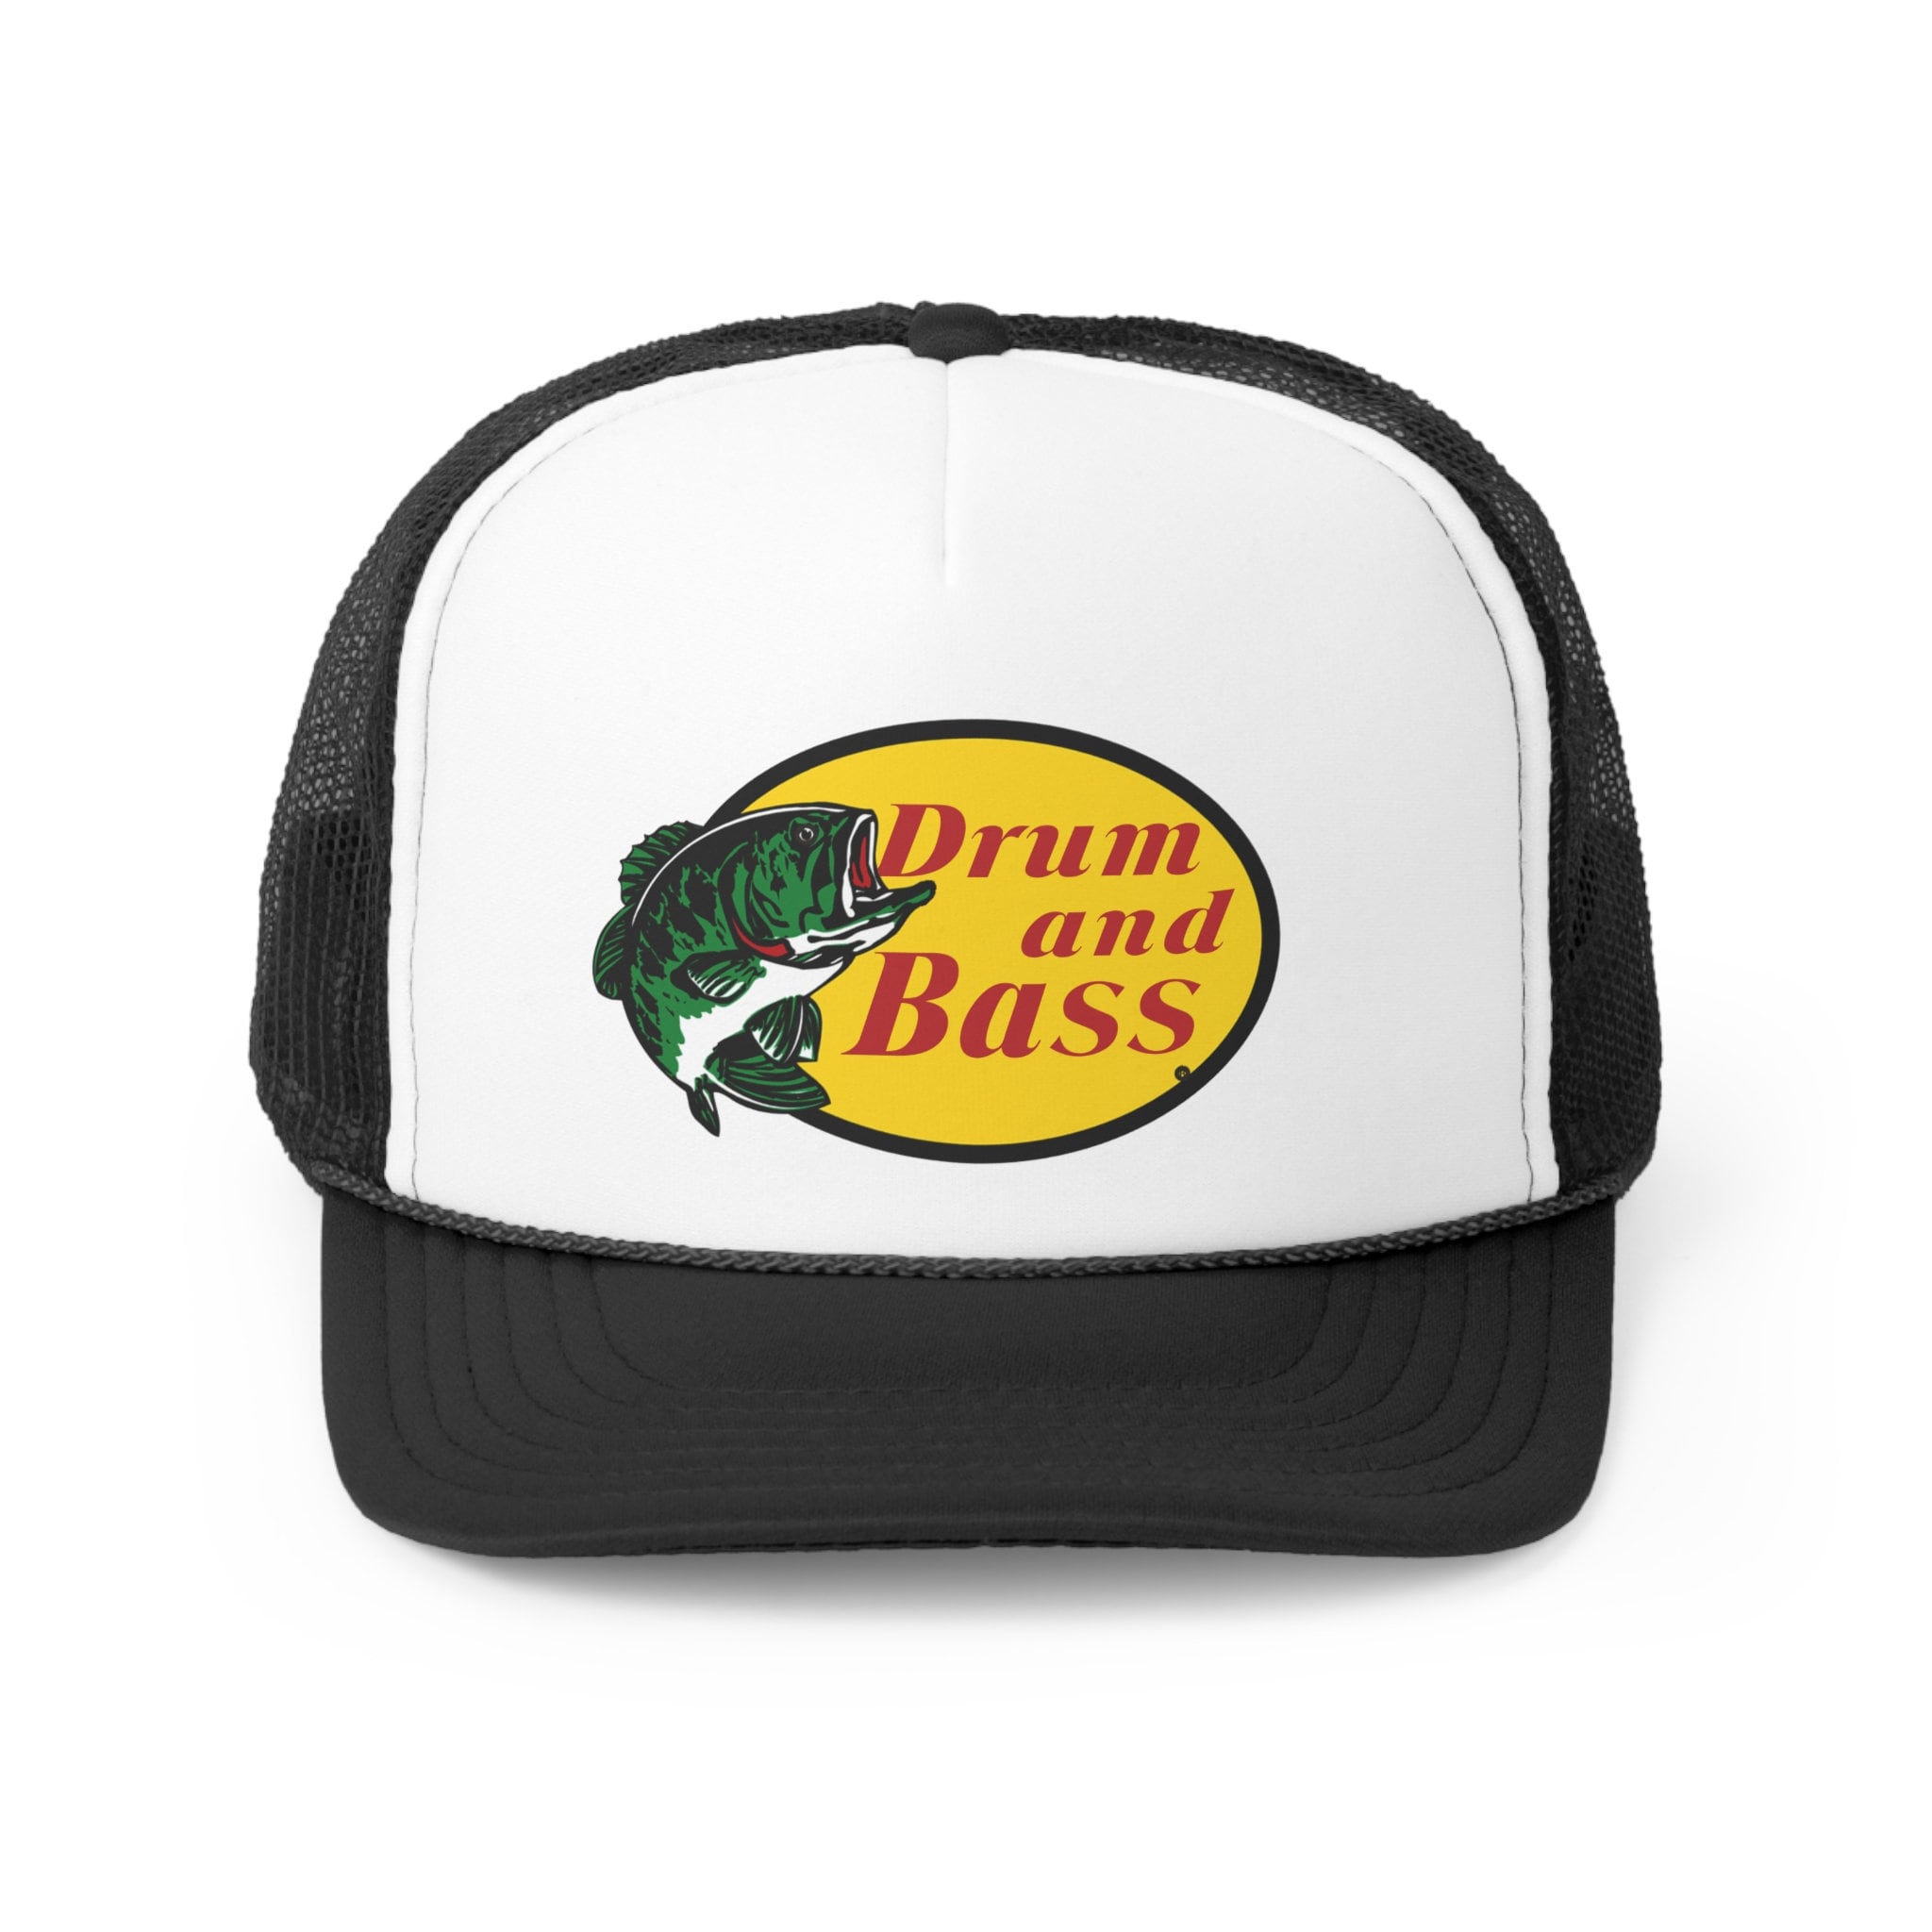 Drum and Bass Pro Trucker Hat, Drum and Bass, Rave Hat, Festival